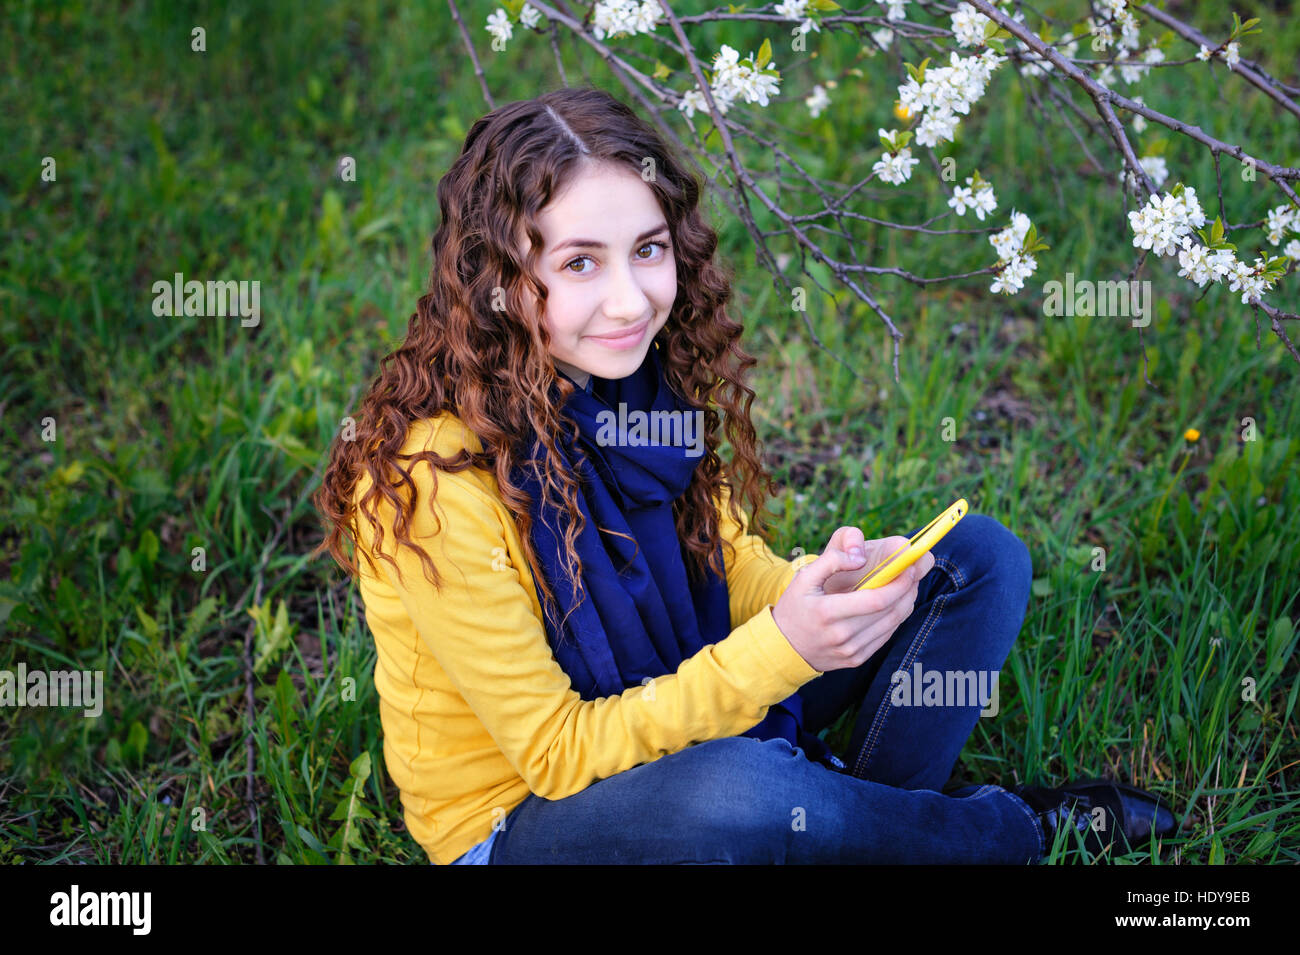 beautiful young woman sitting on the grass with phone Stock Photo